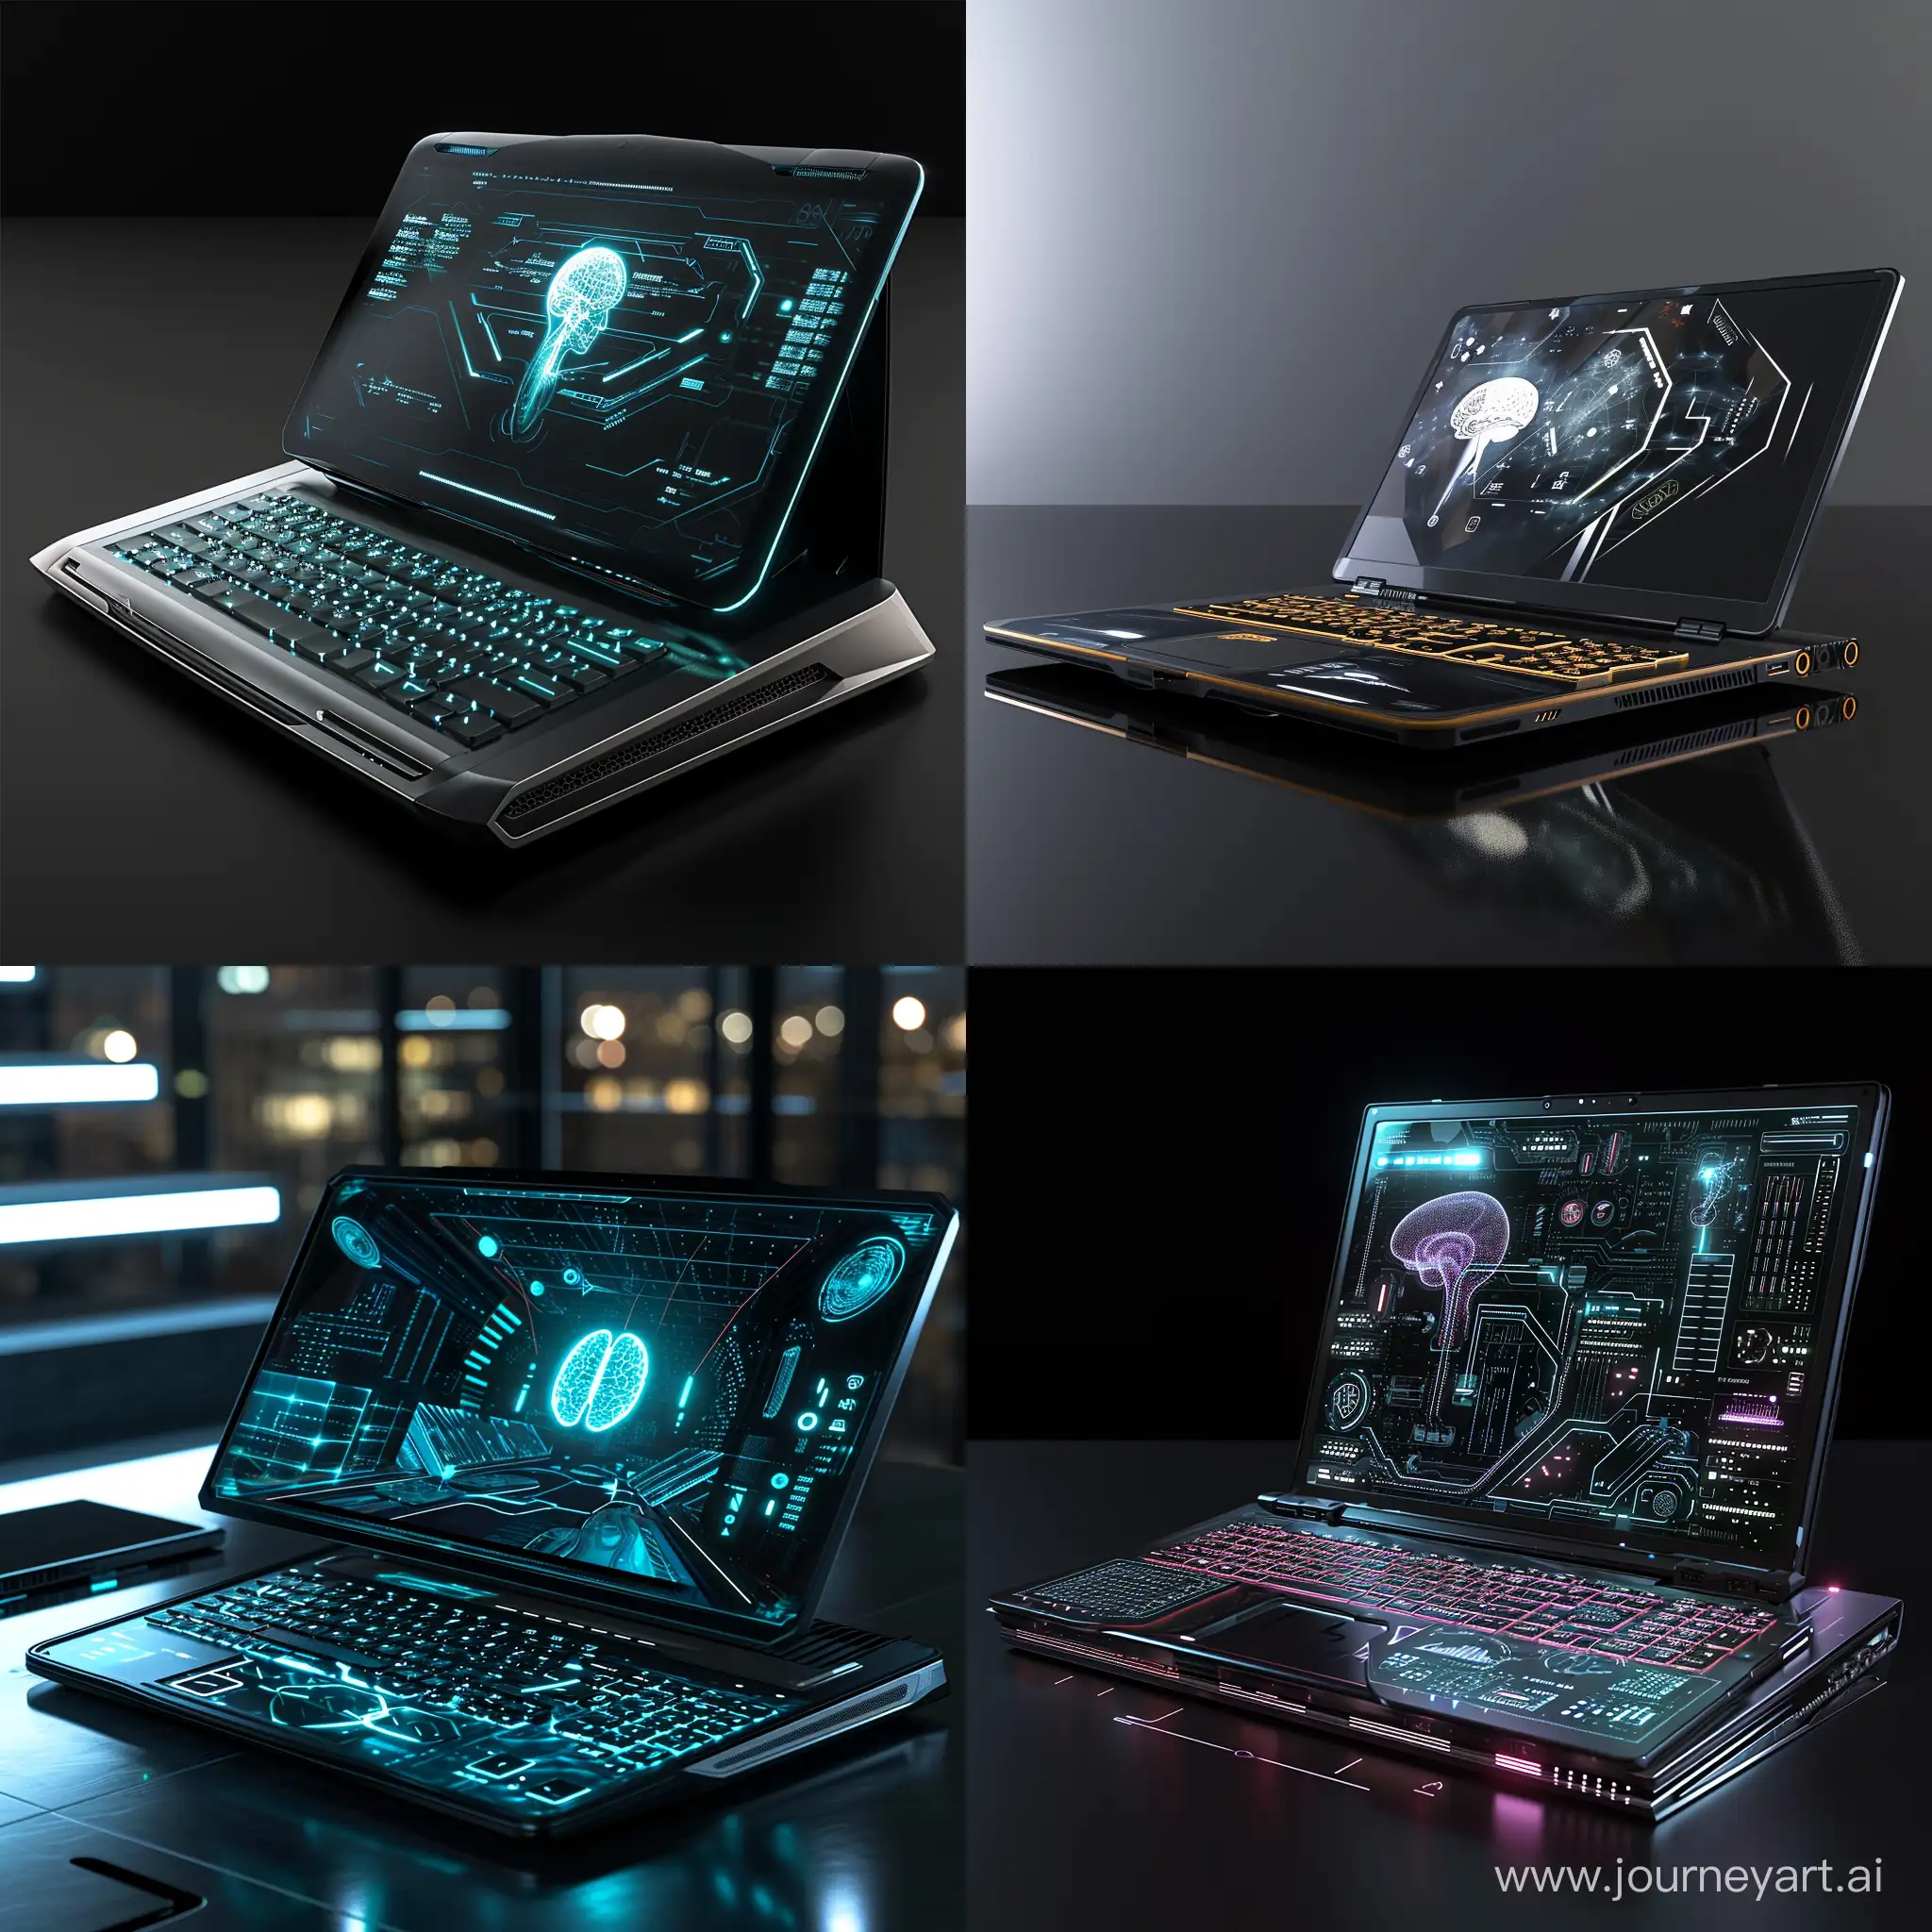 CuttingEdge-Futuristic-Laptop-with-Flexible-Display-and-Holographic-Keyboard